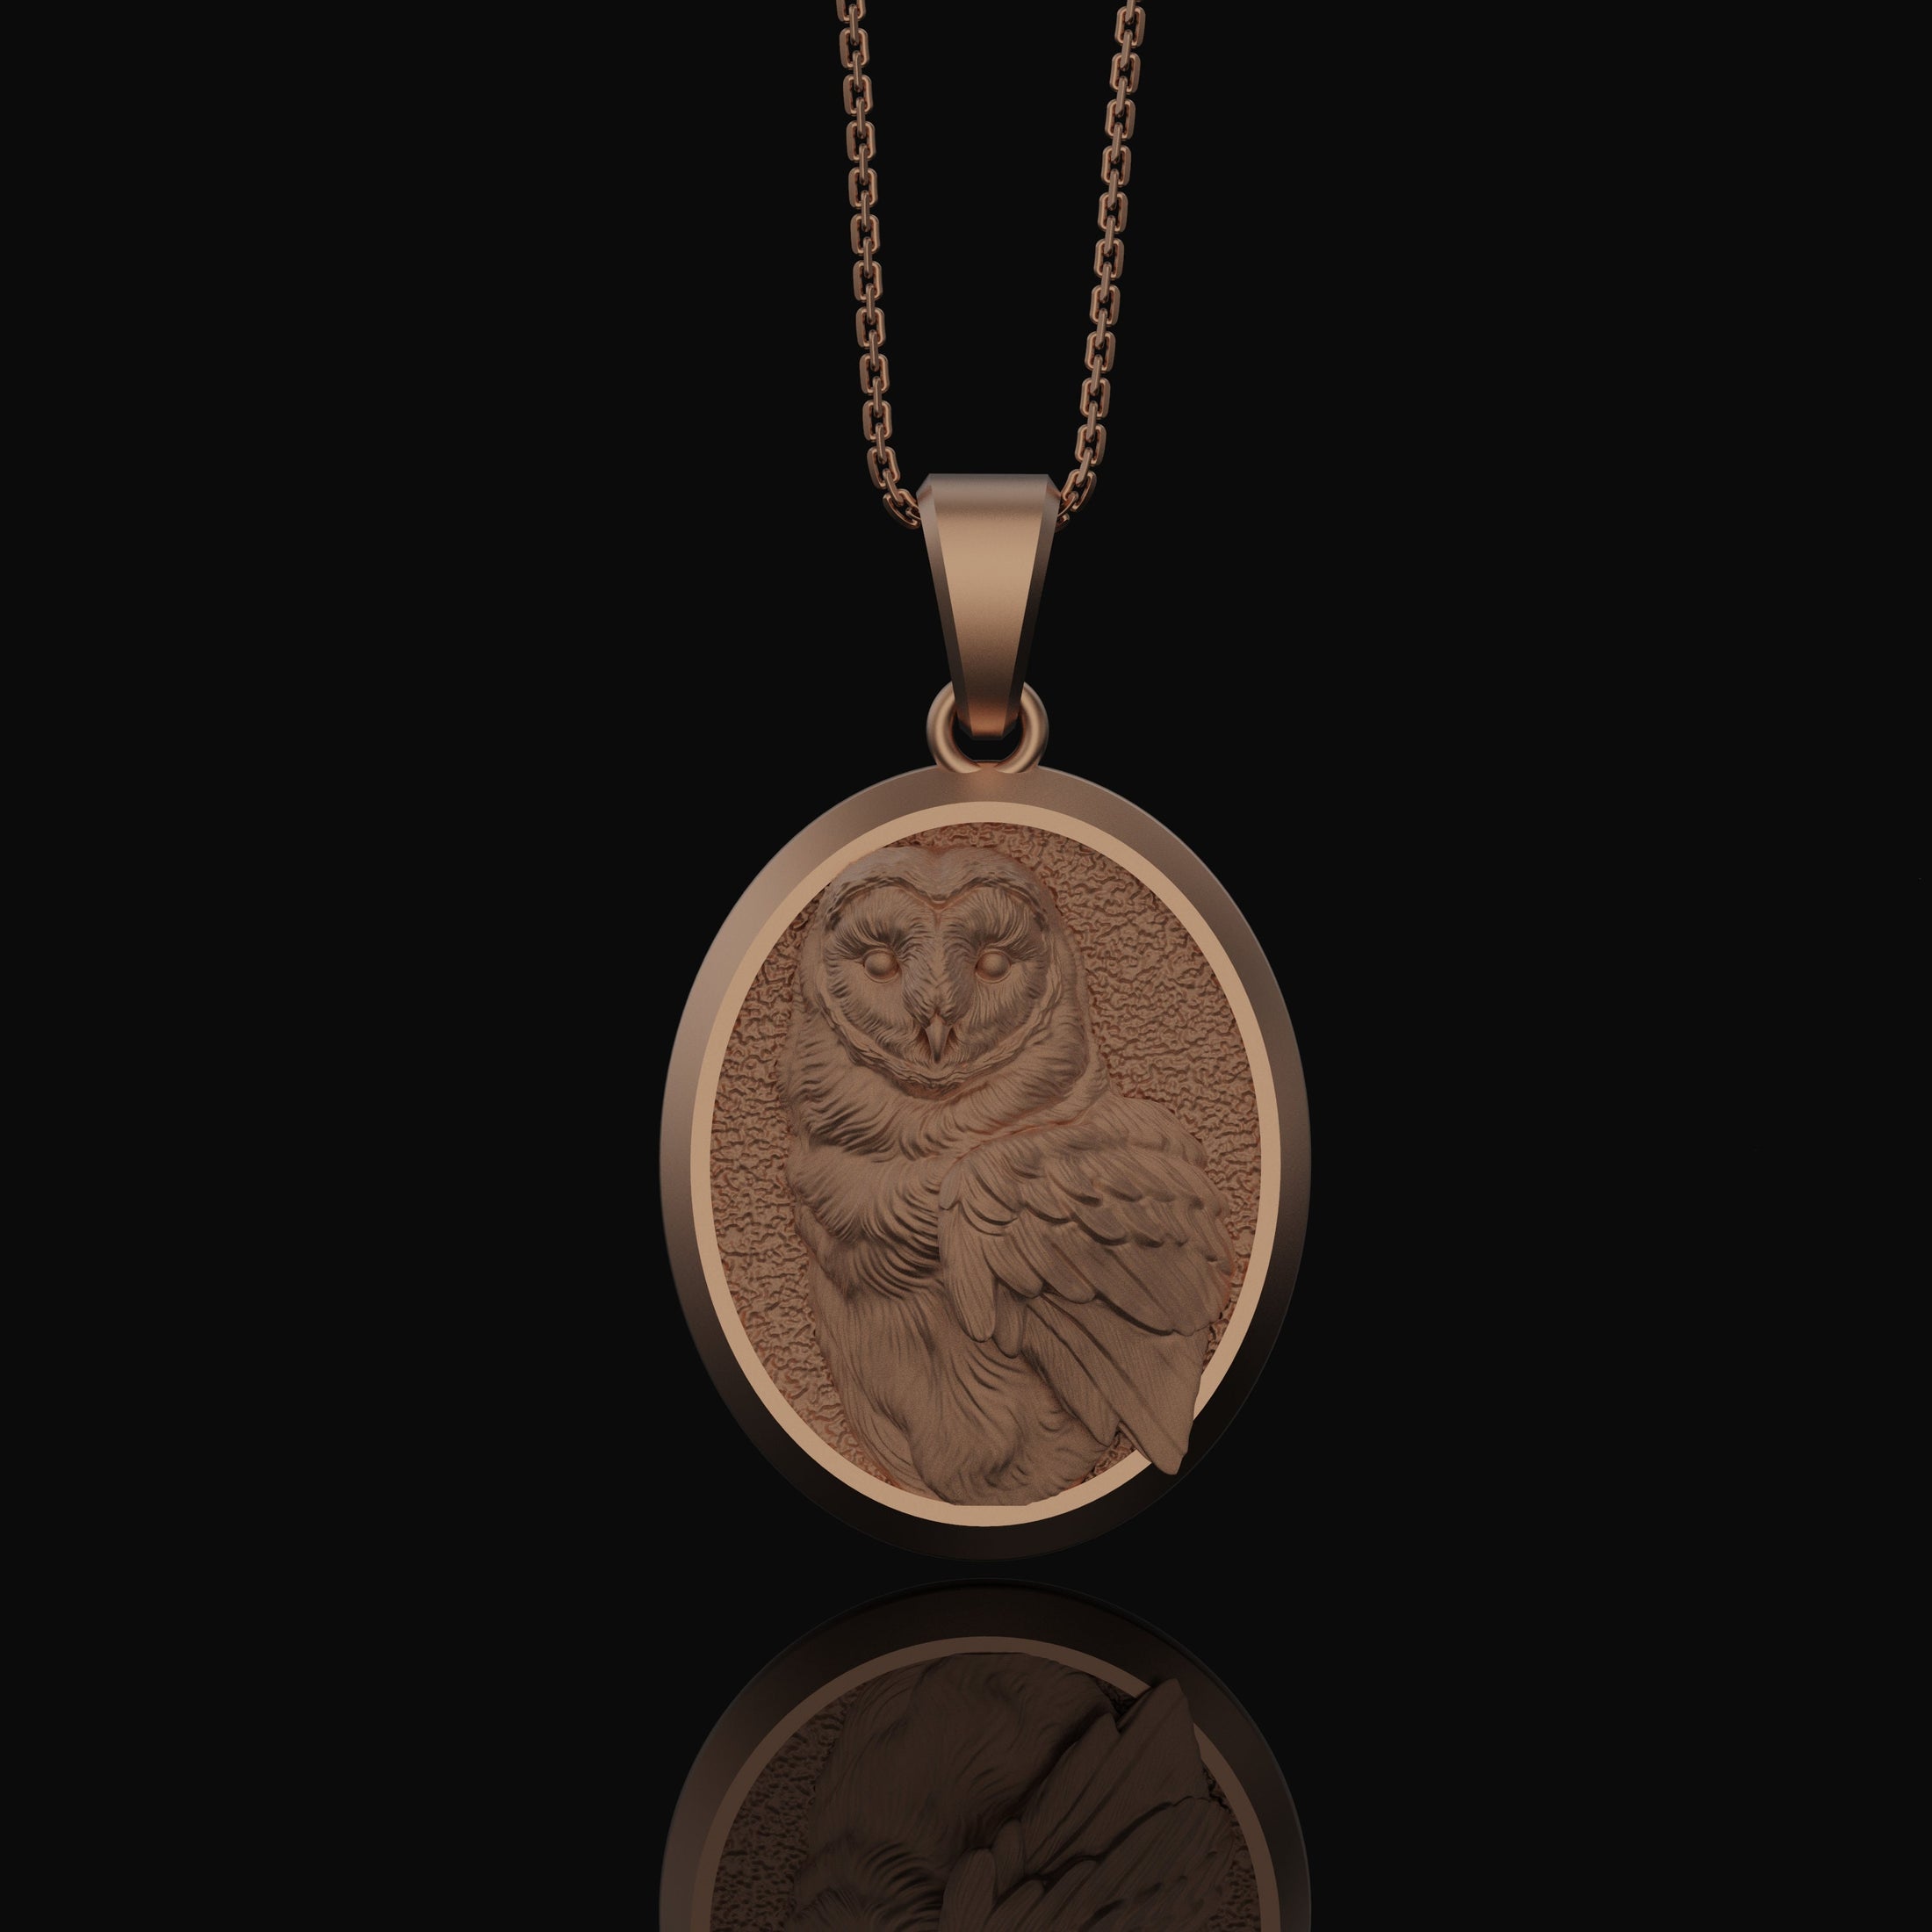 Personalized Silver Owl Pendant - Custom Engraved Owl Necklace, Handcrafted Bird Jewelry, Unique Gift